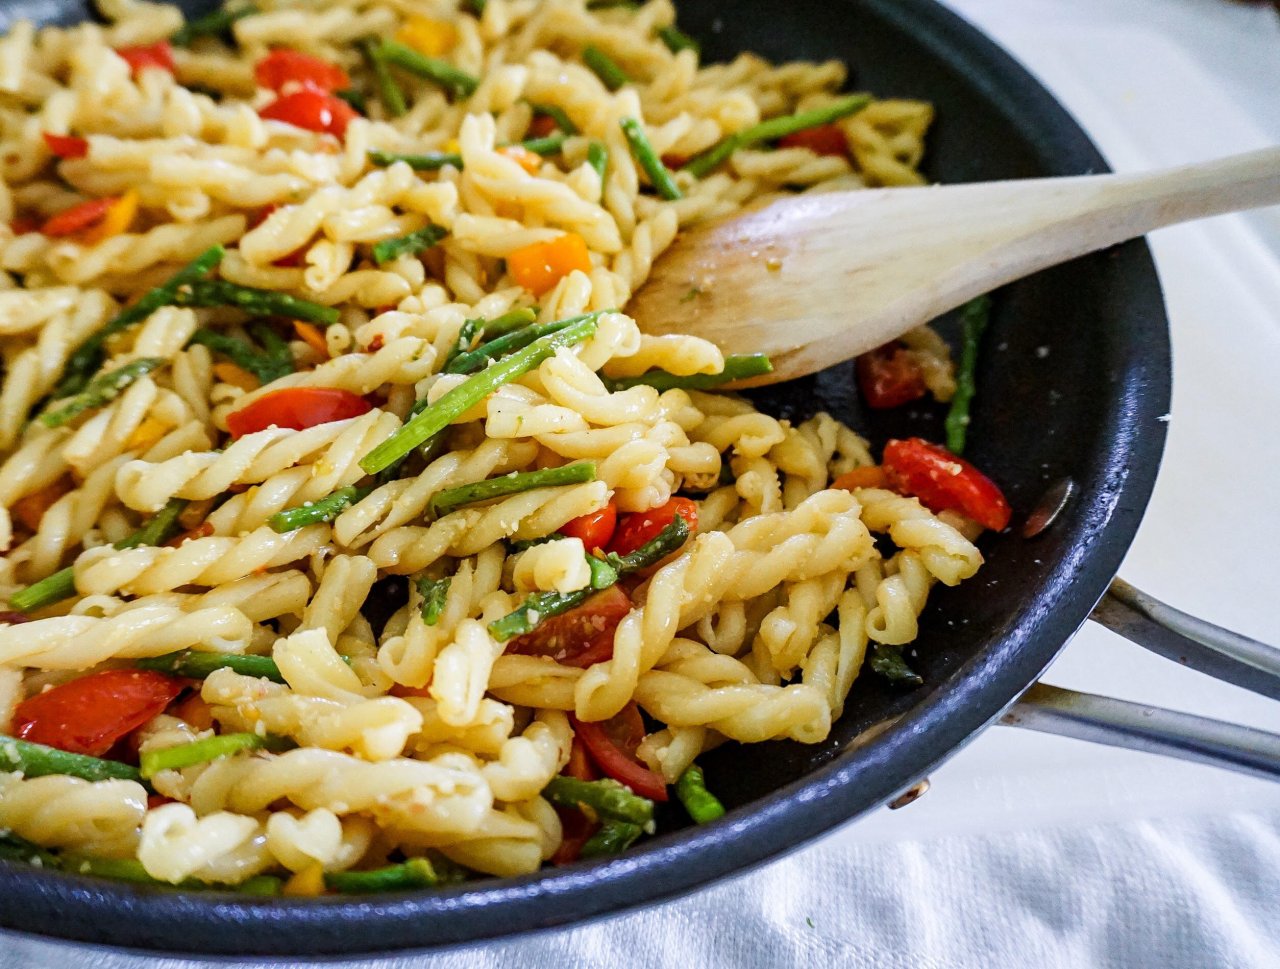 Can We Accurately Guess Your Age by Your Pasta Opinions? Quiz 10